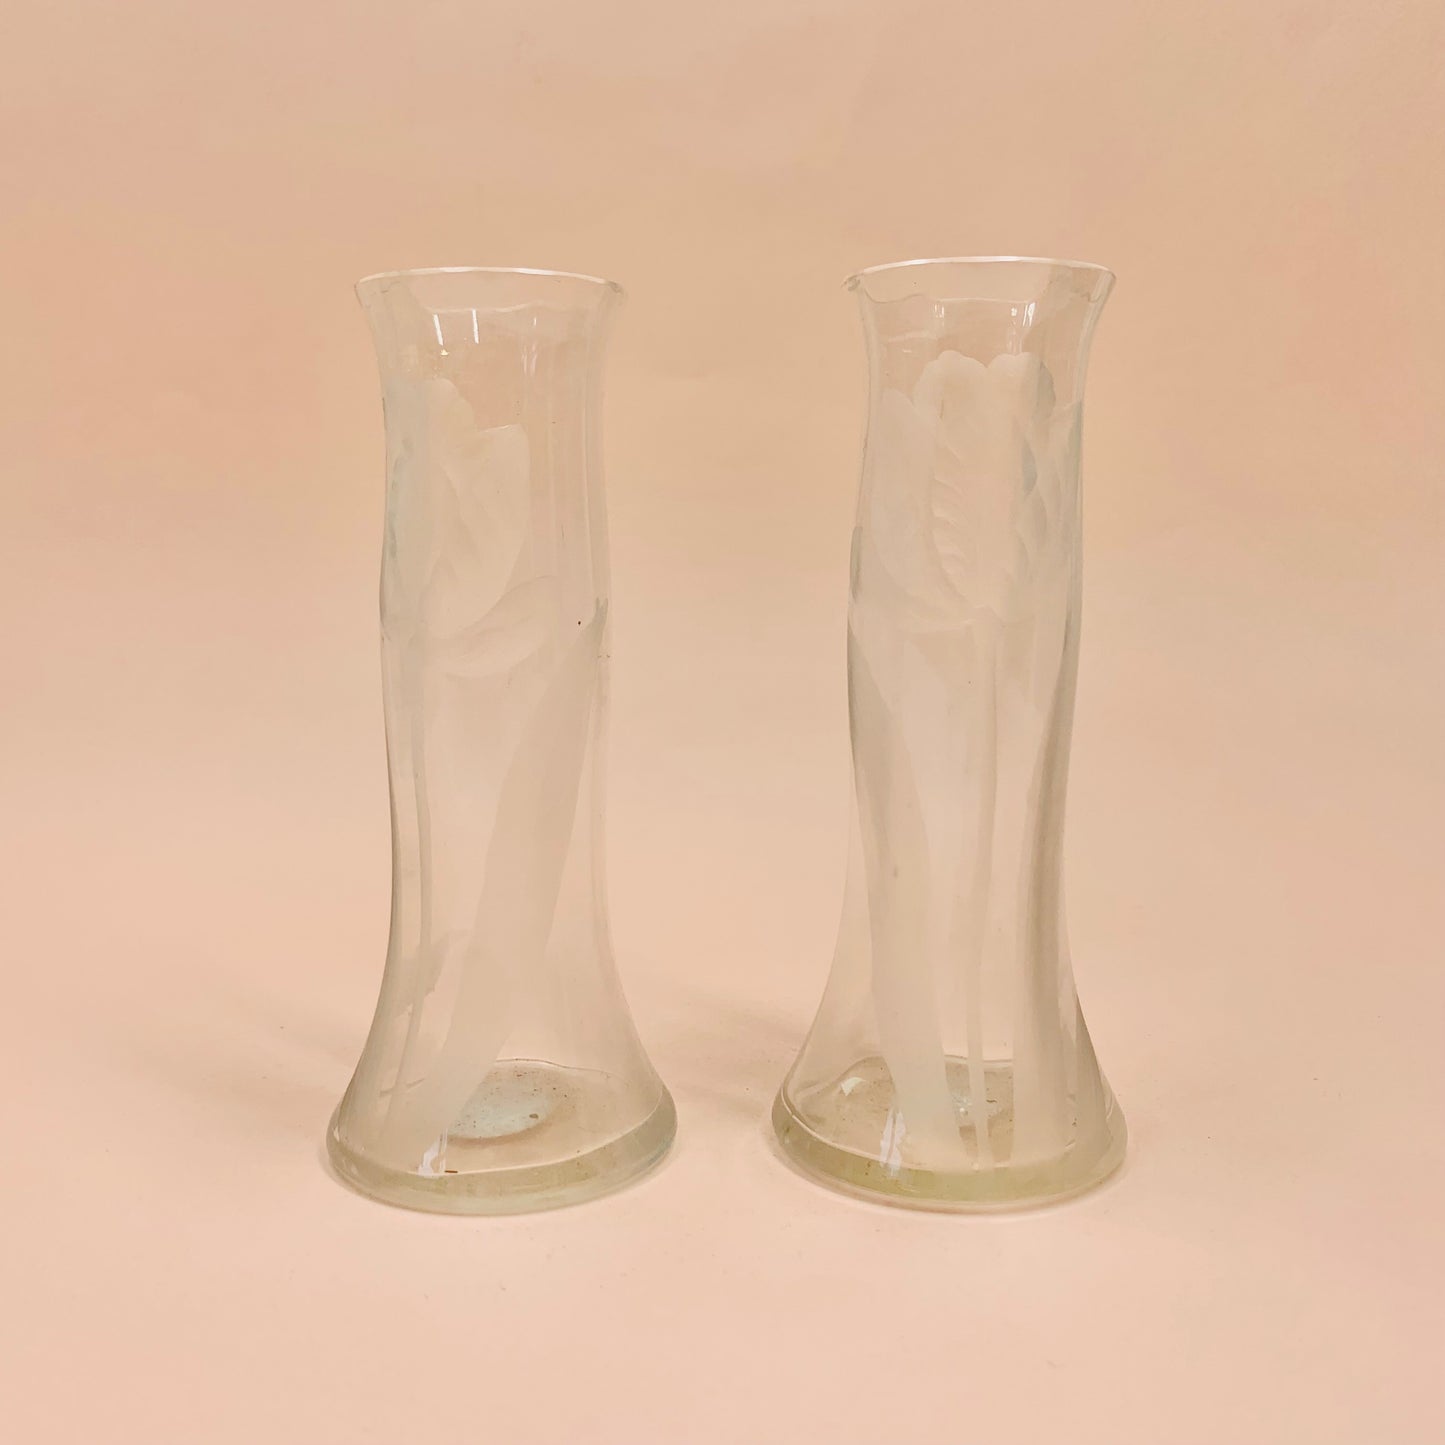 Antique hand etched set of 2 mini glass vases